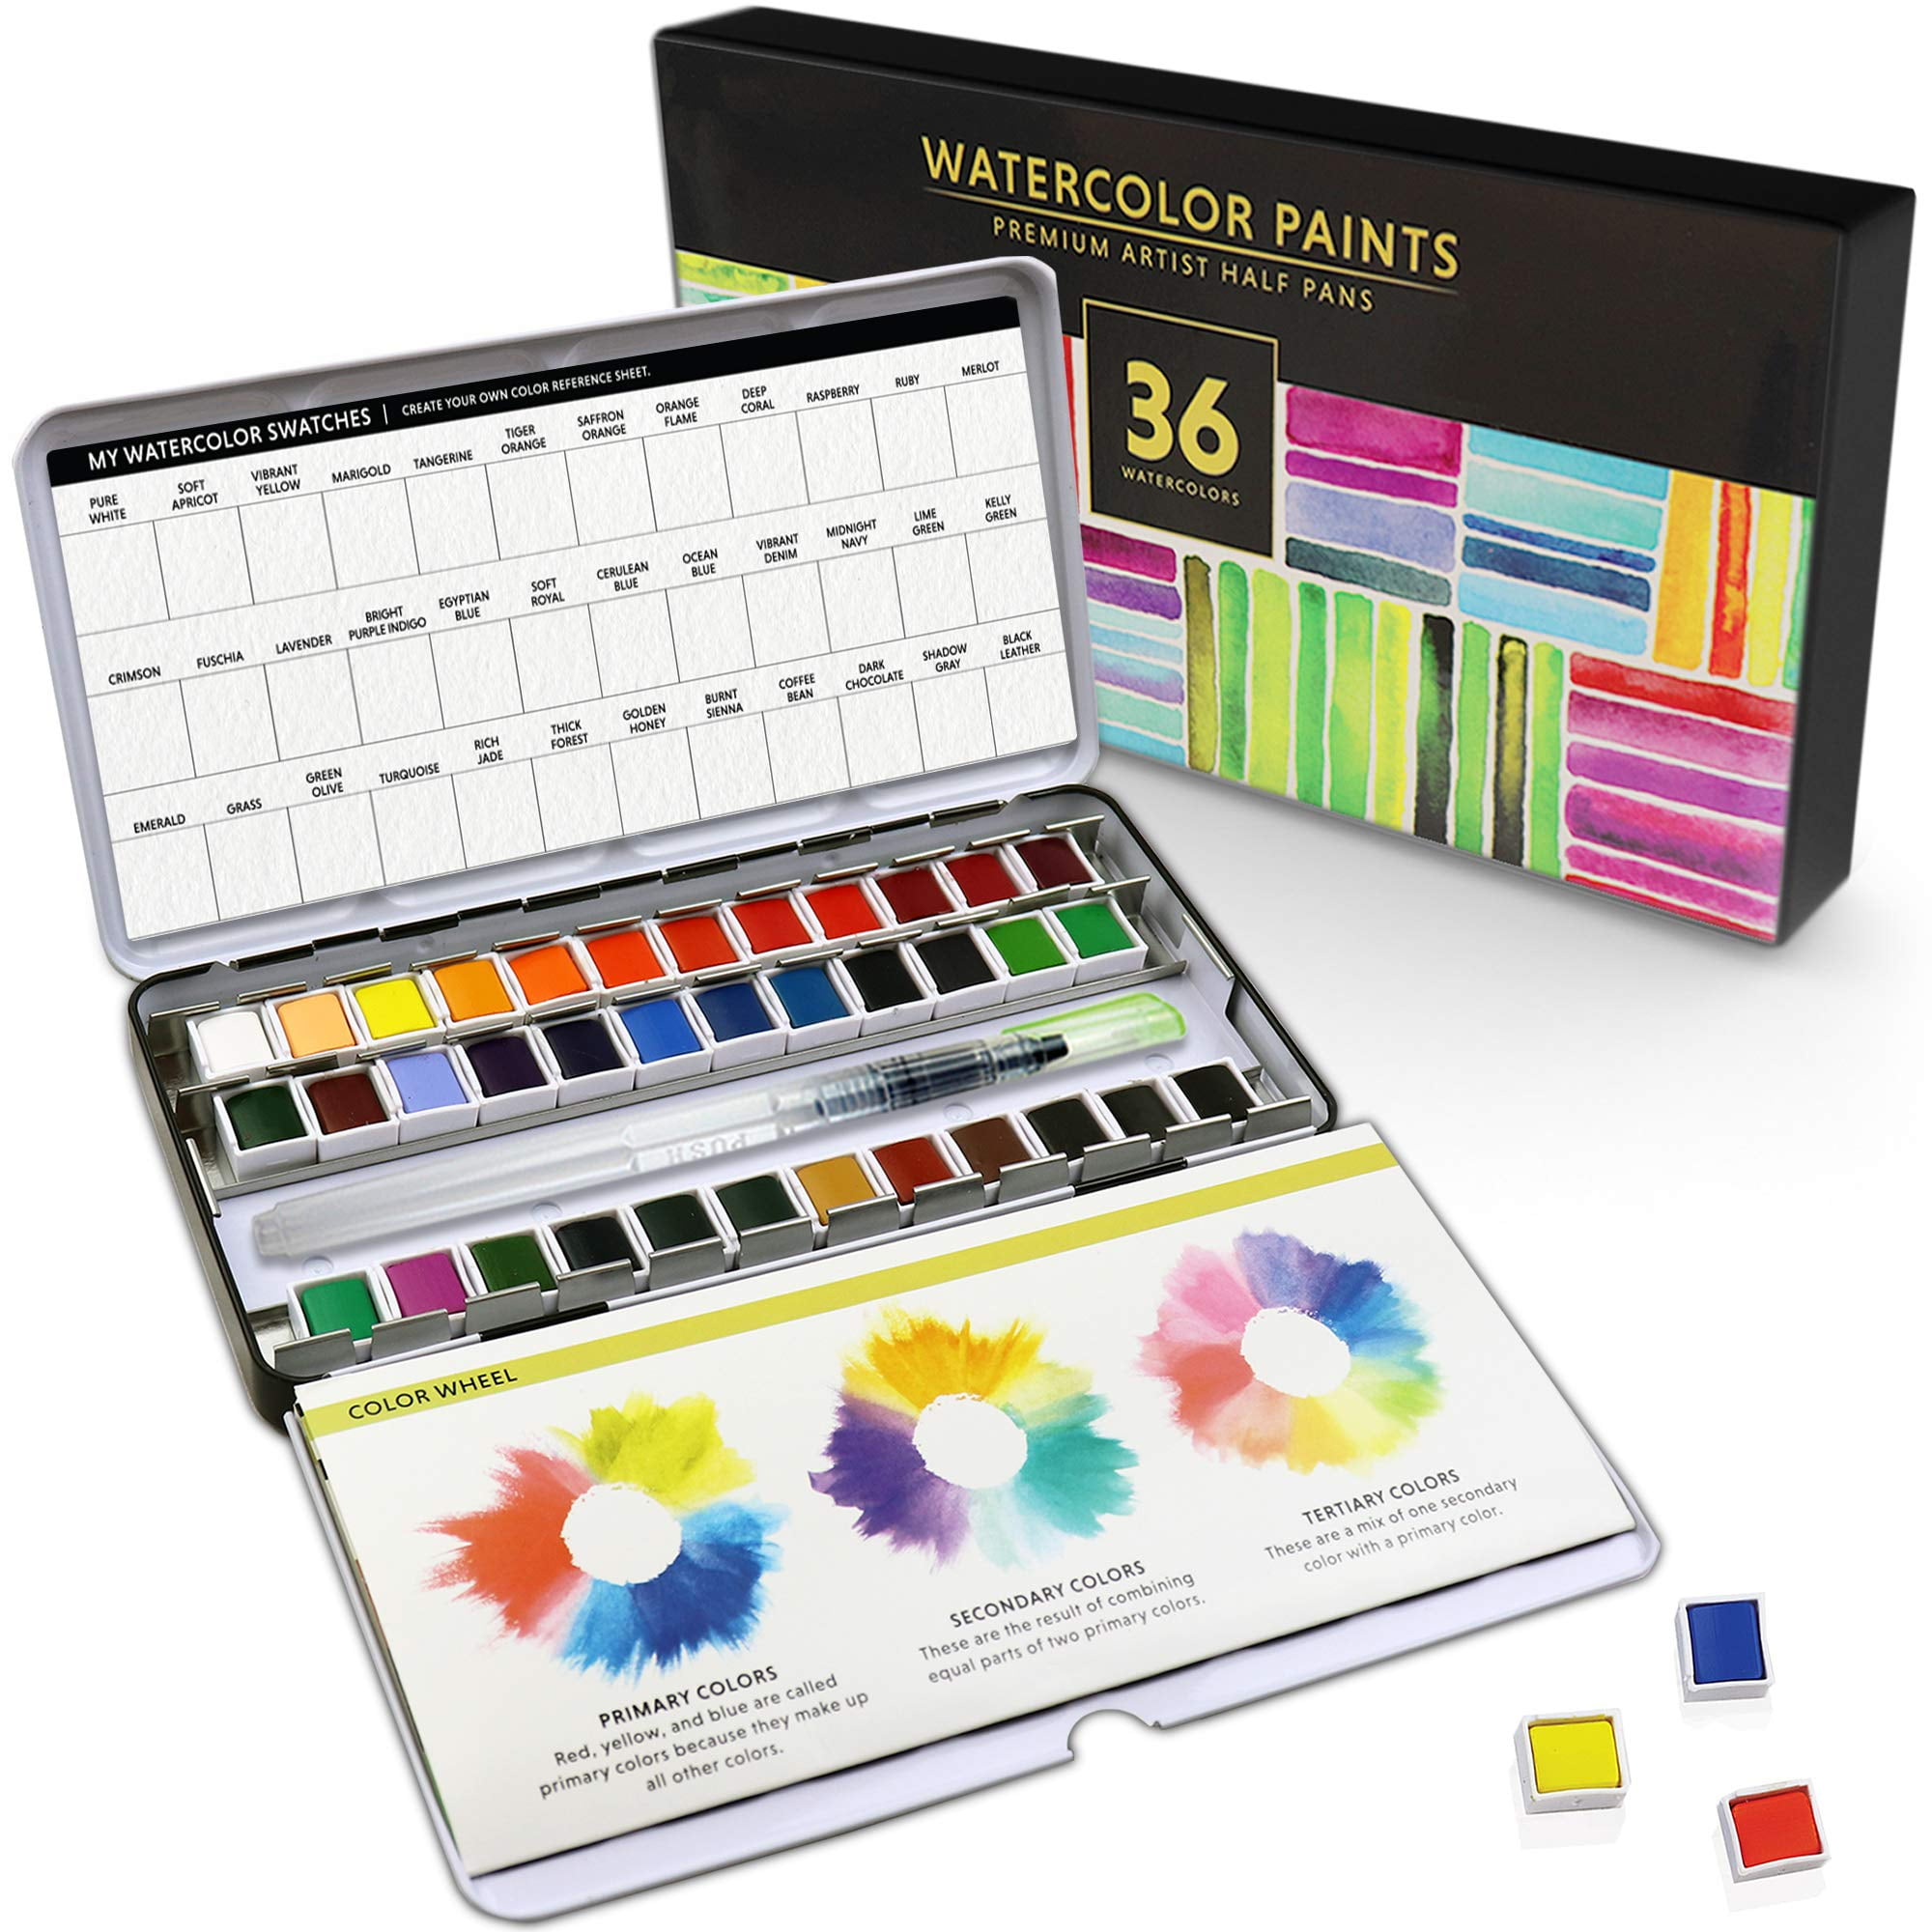 Colorful Handmade Watercolor paint palette - LIMITED edition 9 half pans in  vintage Typewriter Tin with water brush - Free Shipping in US